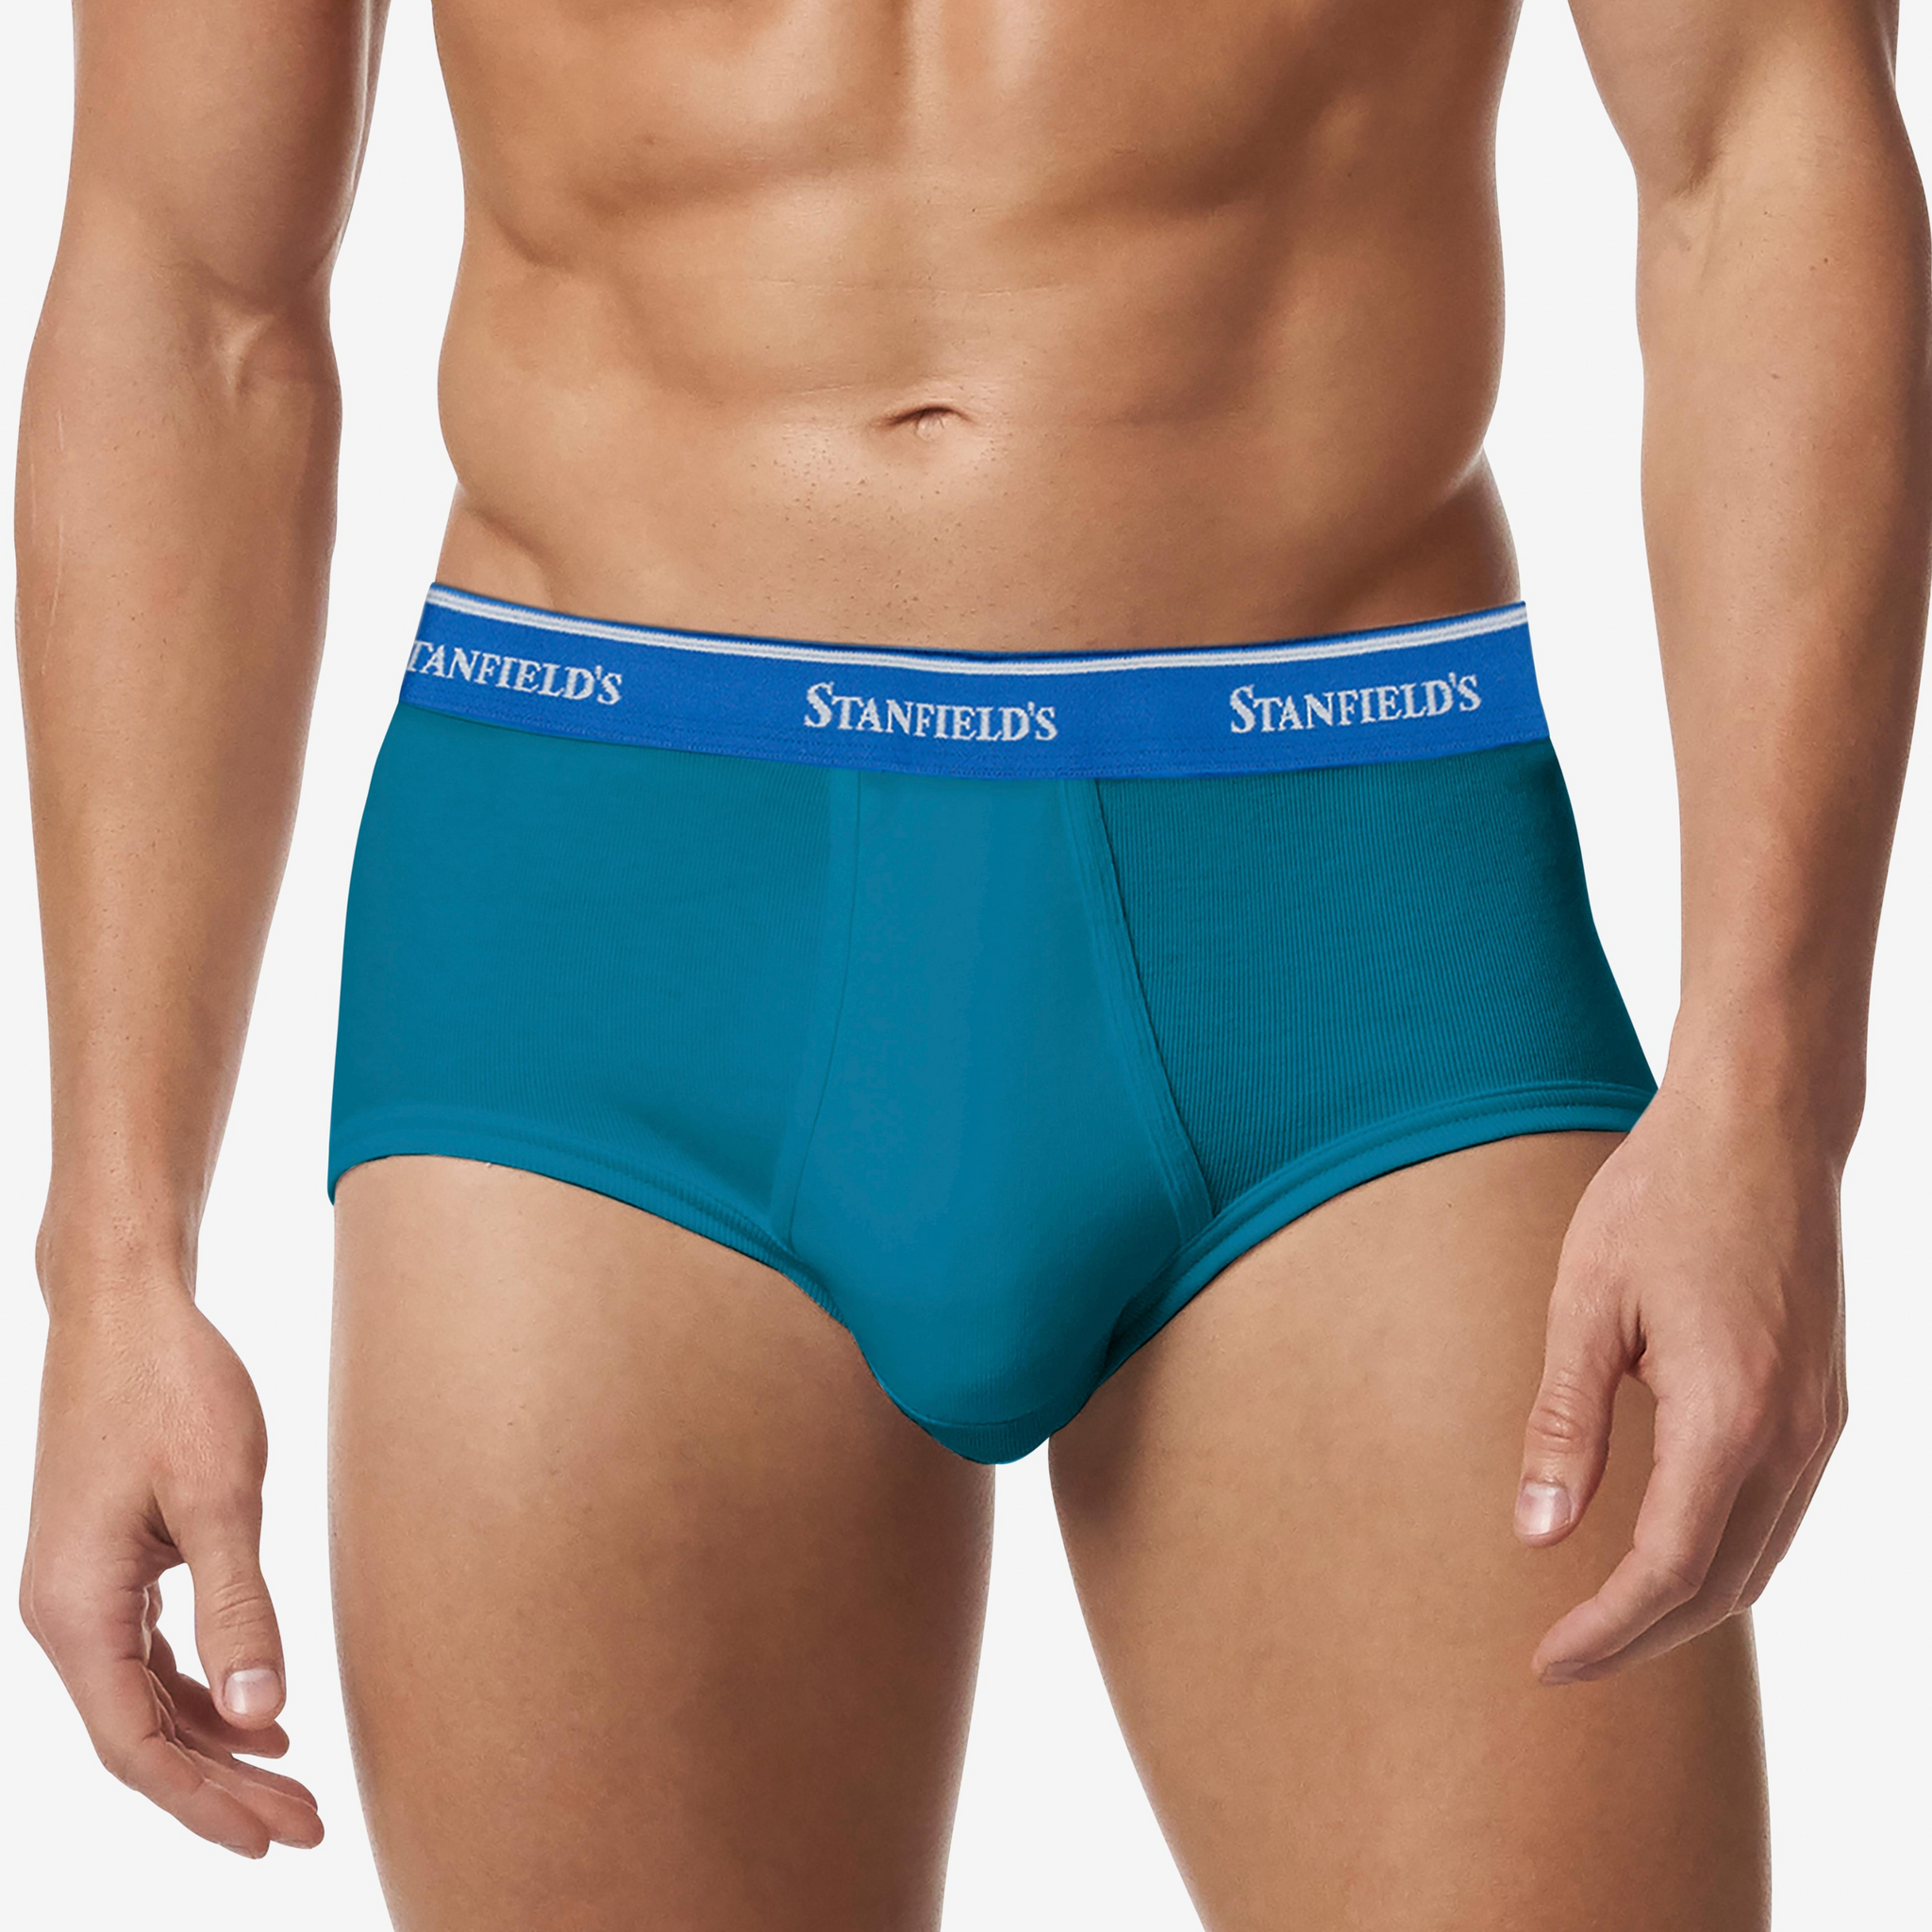 Men's Sexy Ribbed Cotton Fly Pouch Brief Underwear